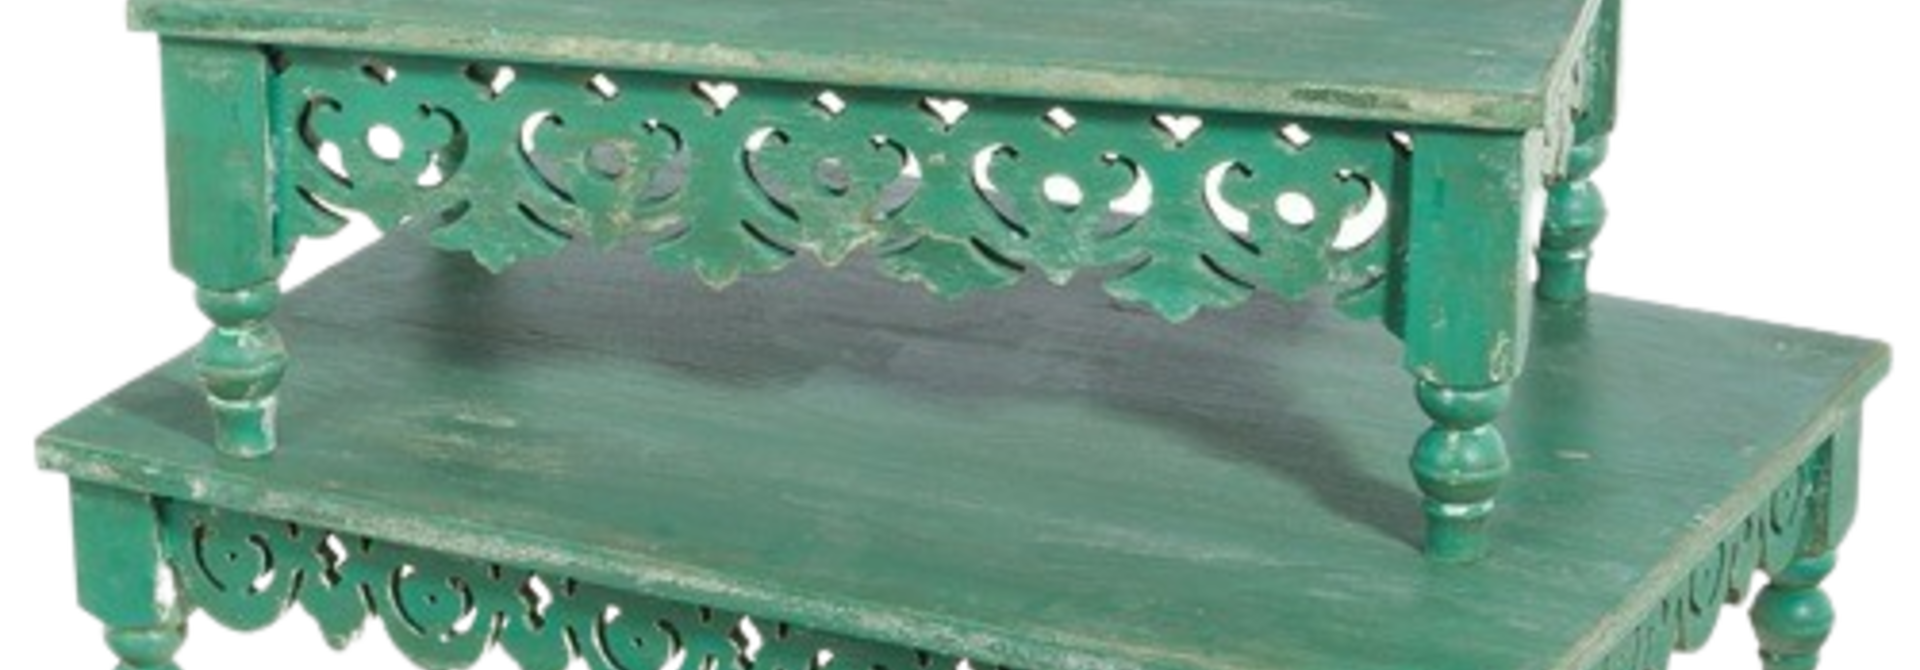 Ornate | The Riser Collection, Green - 20.75 Inch x 14.5 Inch x 5.25 Inch